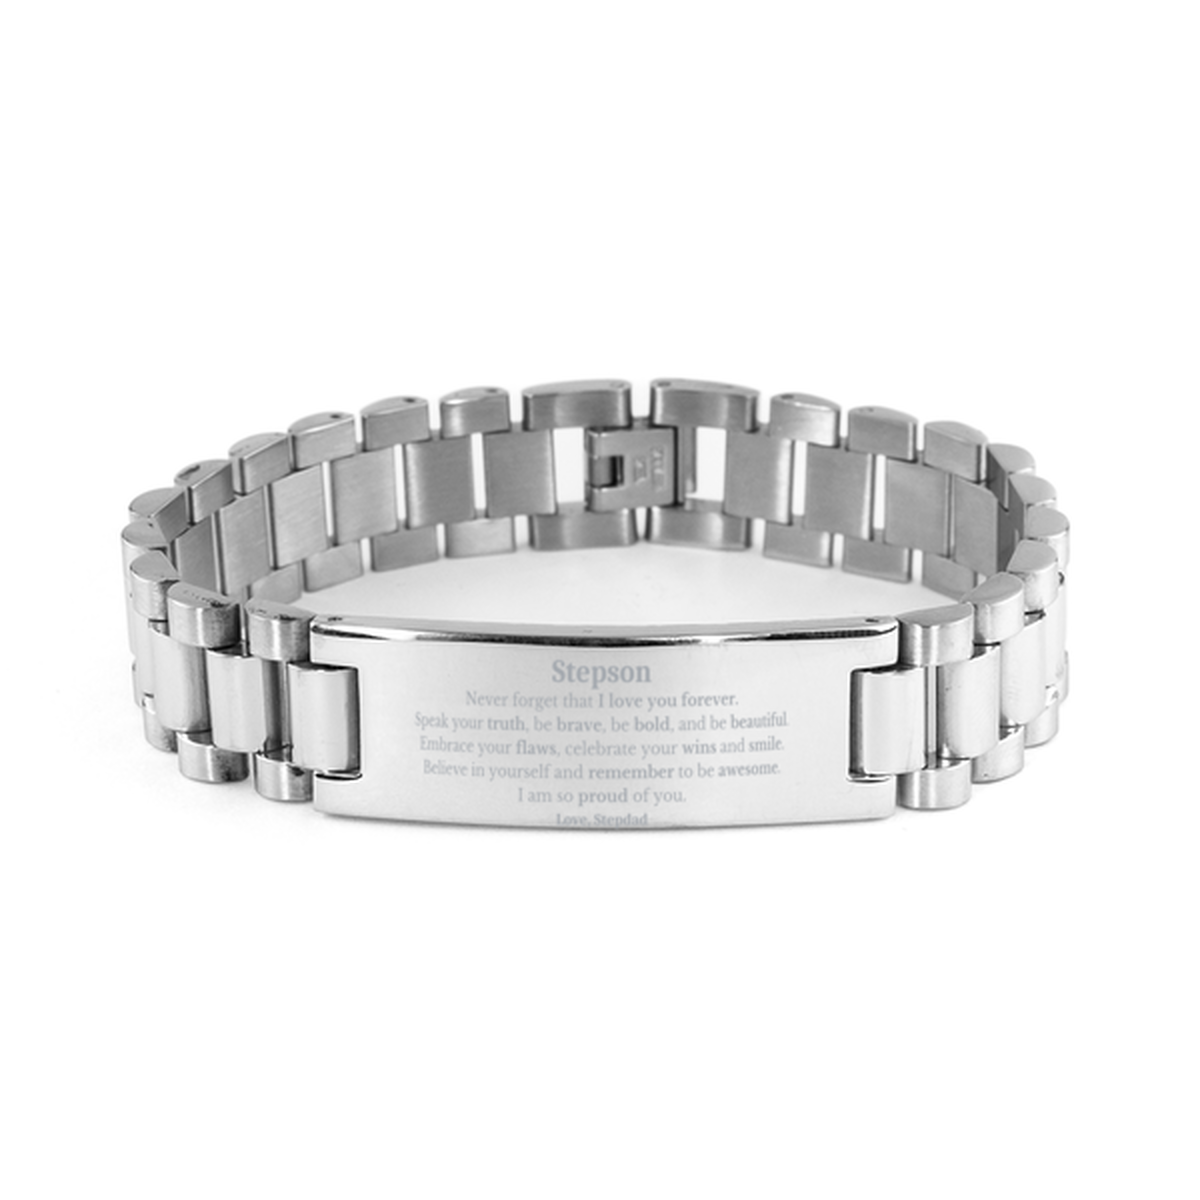 Stepson Ladder Stainless Steel Bracelet, Never forget that I love you forever, Inspirational Stepson Birthday Unique Gifts From Stepdad